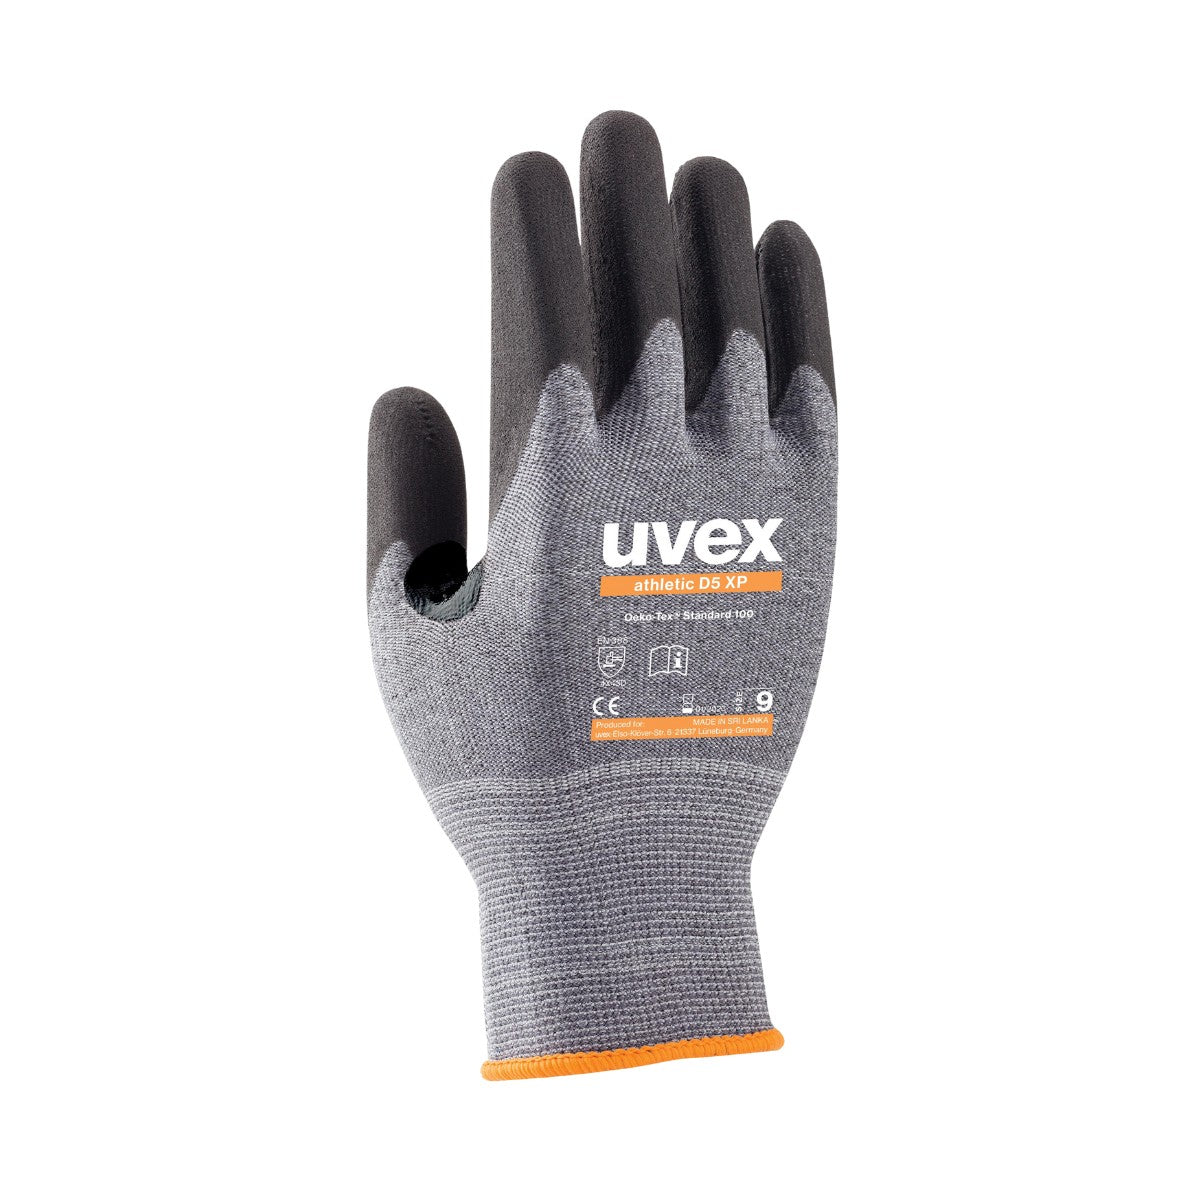 uvex Athletic D5 XP Cut Protection Glove 60030 (Box of 10)